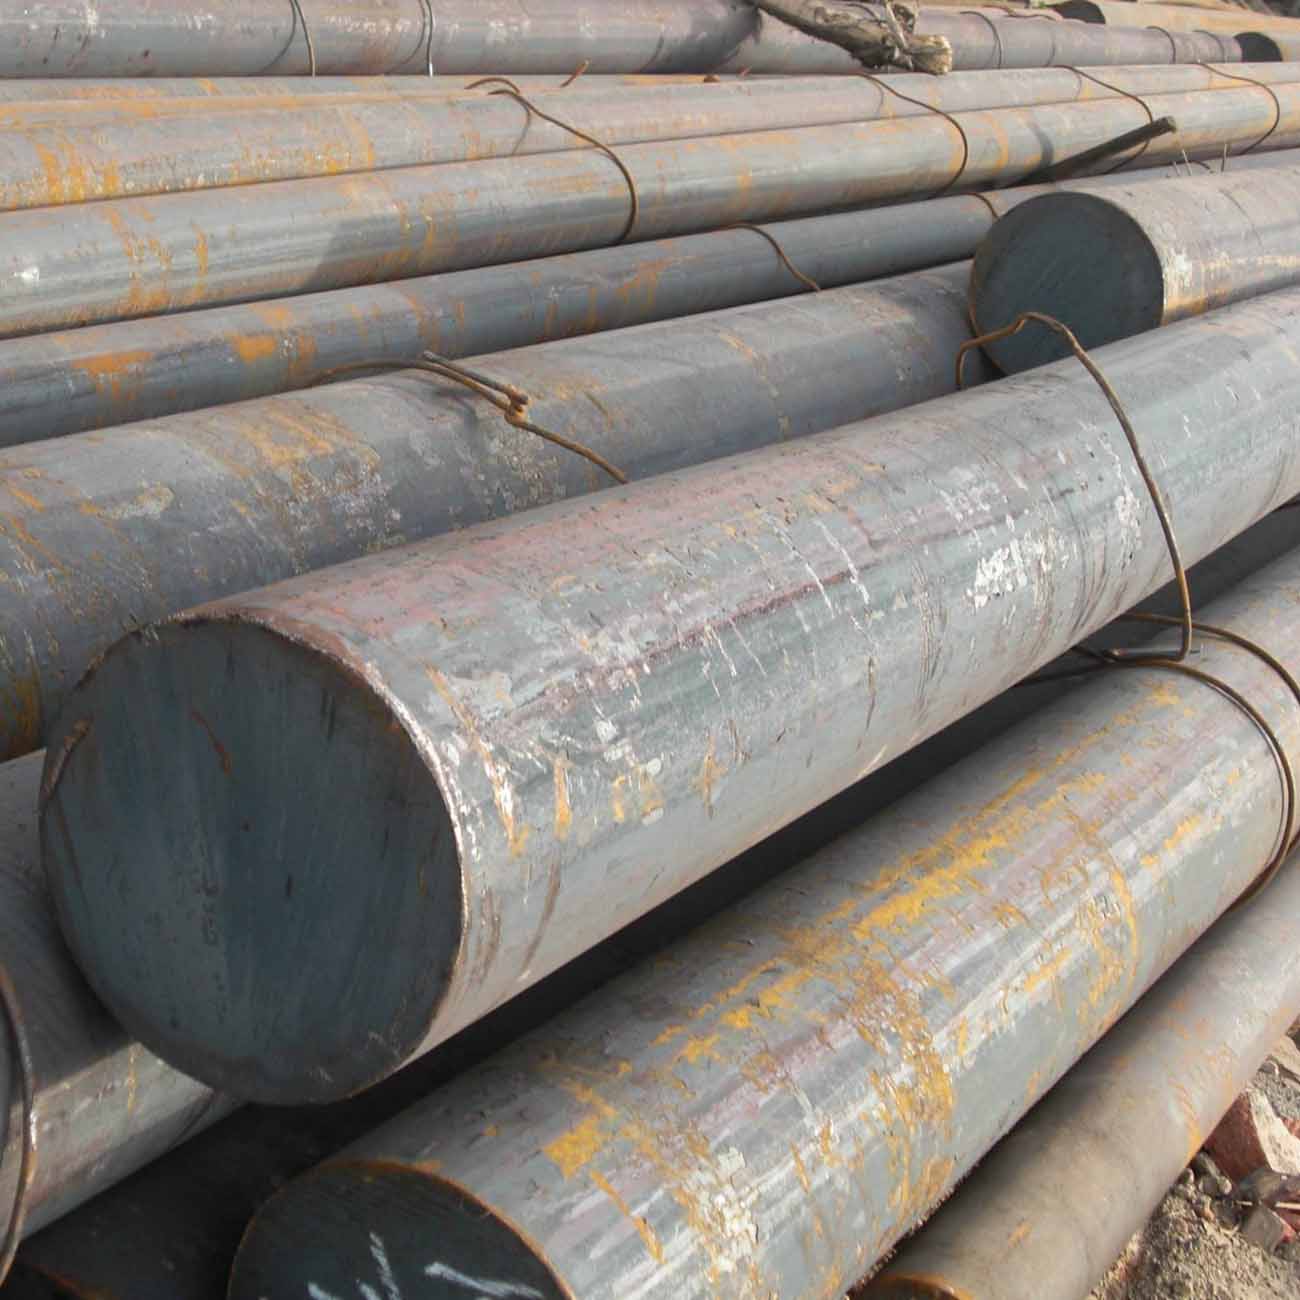 EN26 Alloy Steel Round Bars Manufacturers, Suppliers, Importers, Dealers in Mumbai India